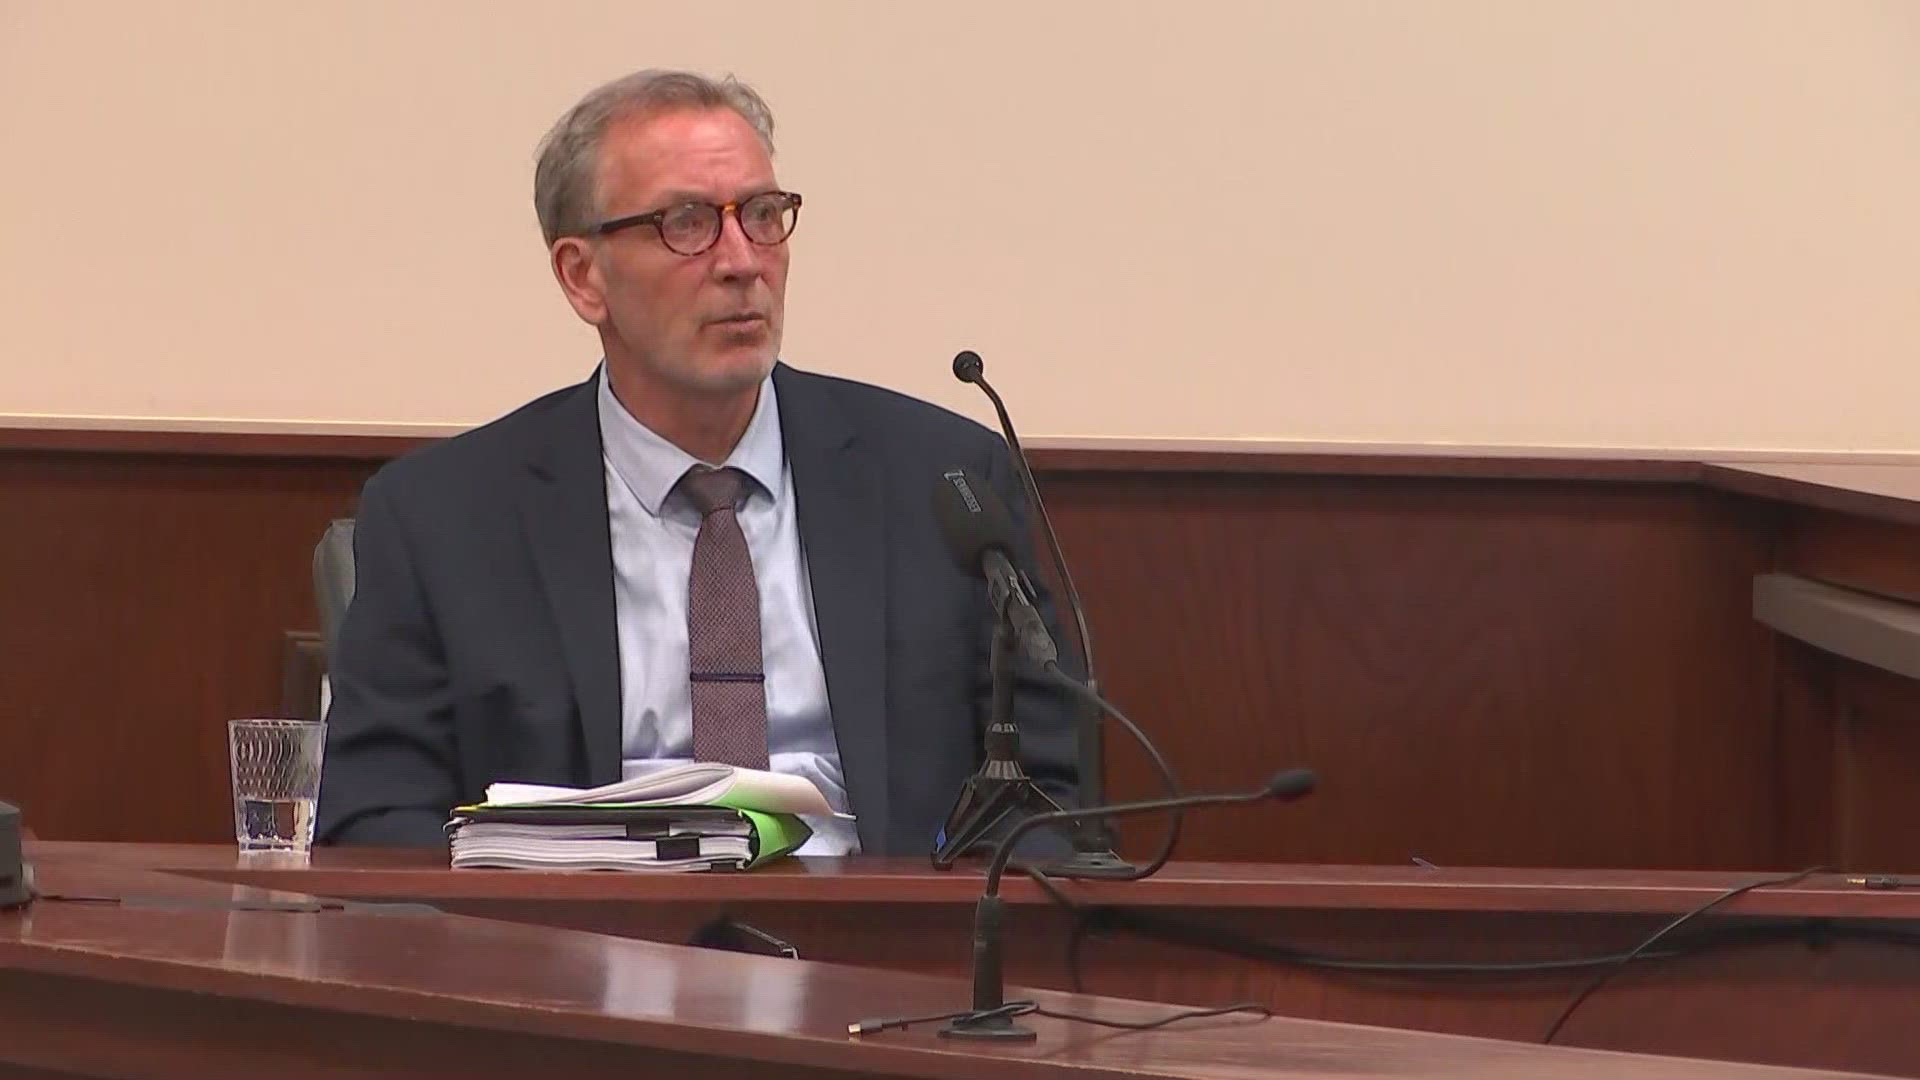 Psychologist Dr. Gregory Pritchard spoke about several "unusual" aspects of Fucci's history, and how he told his girlfriend he wanted to kill someone one day.